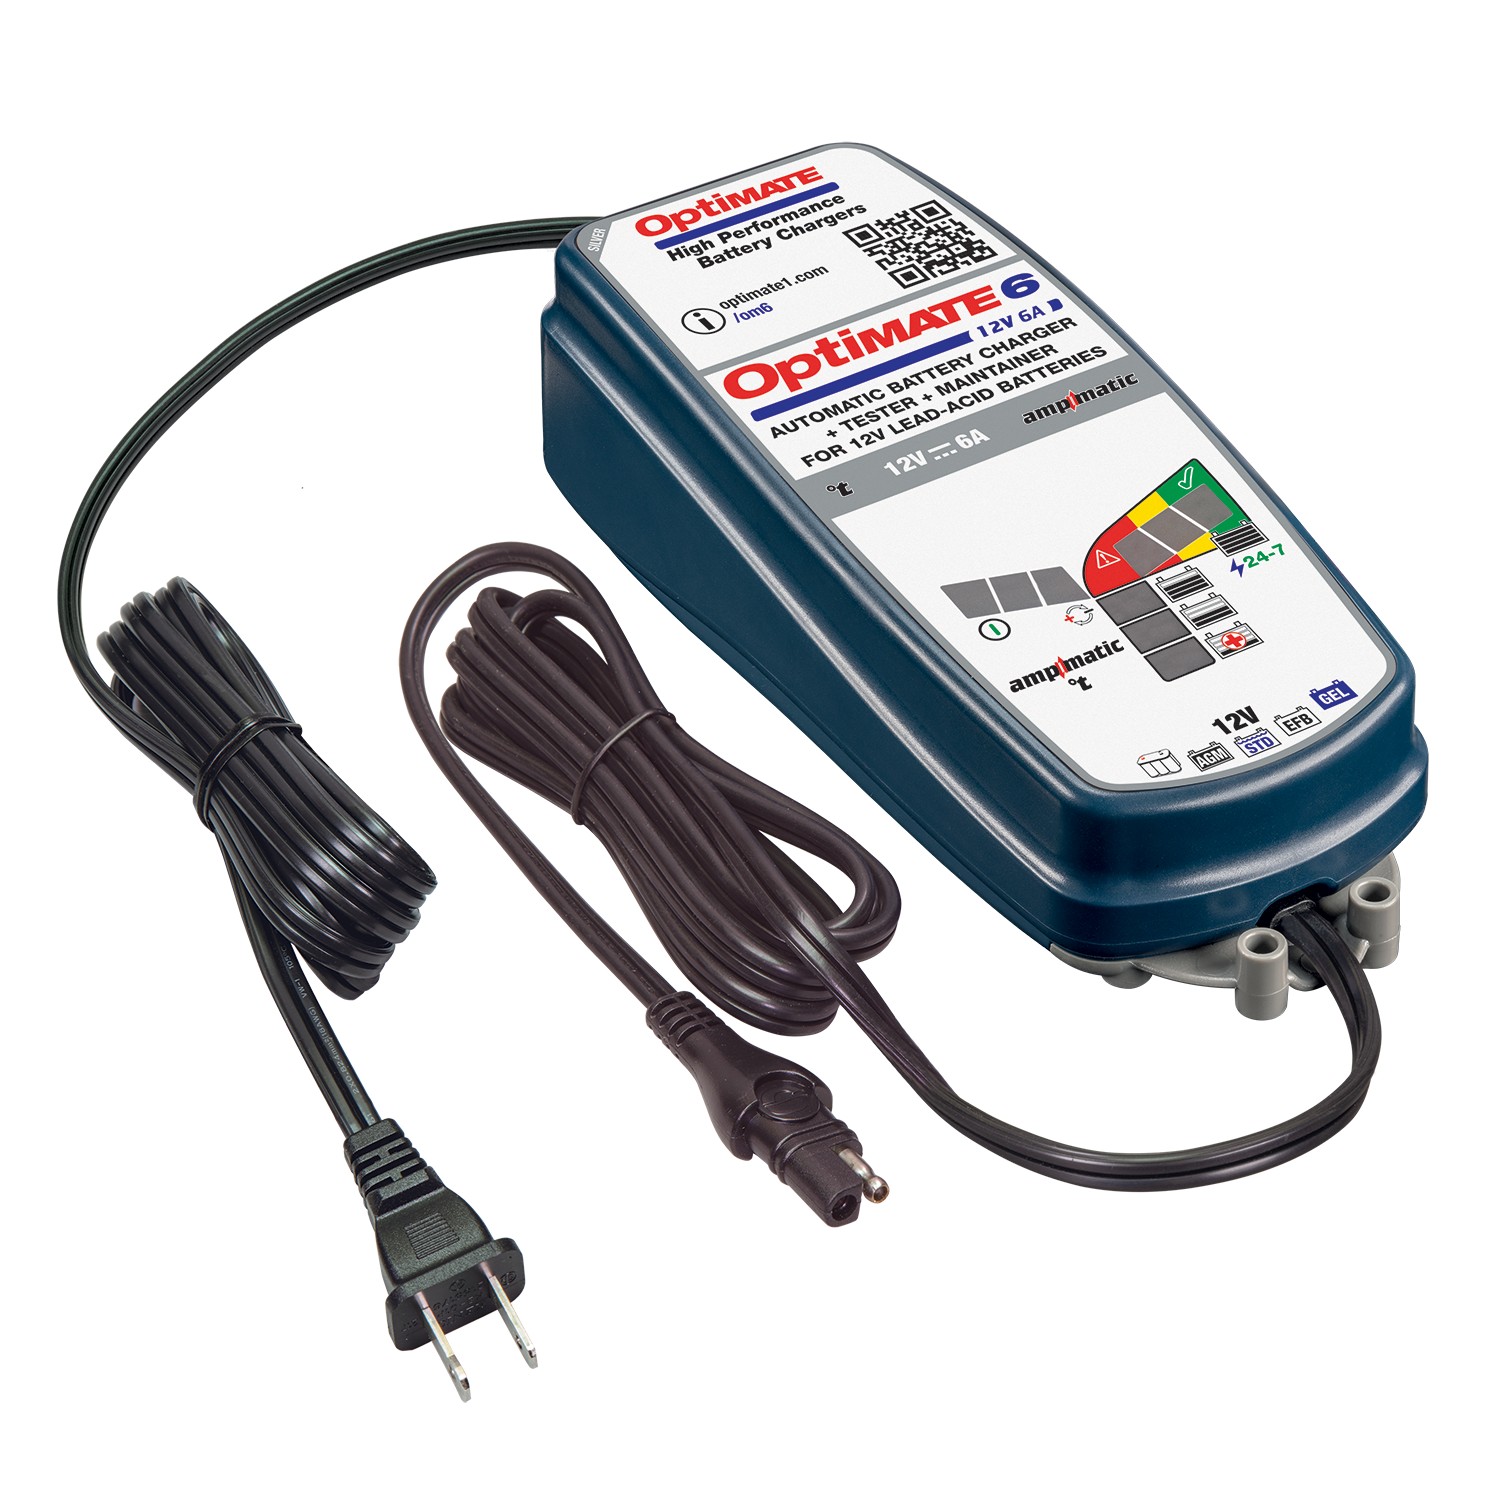 New Optimate 6 Ampmatic Car Van Boat Motorhome Leisure Charger & Maintainer 